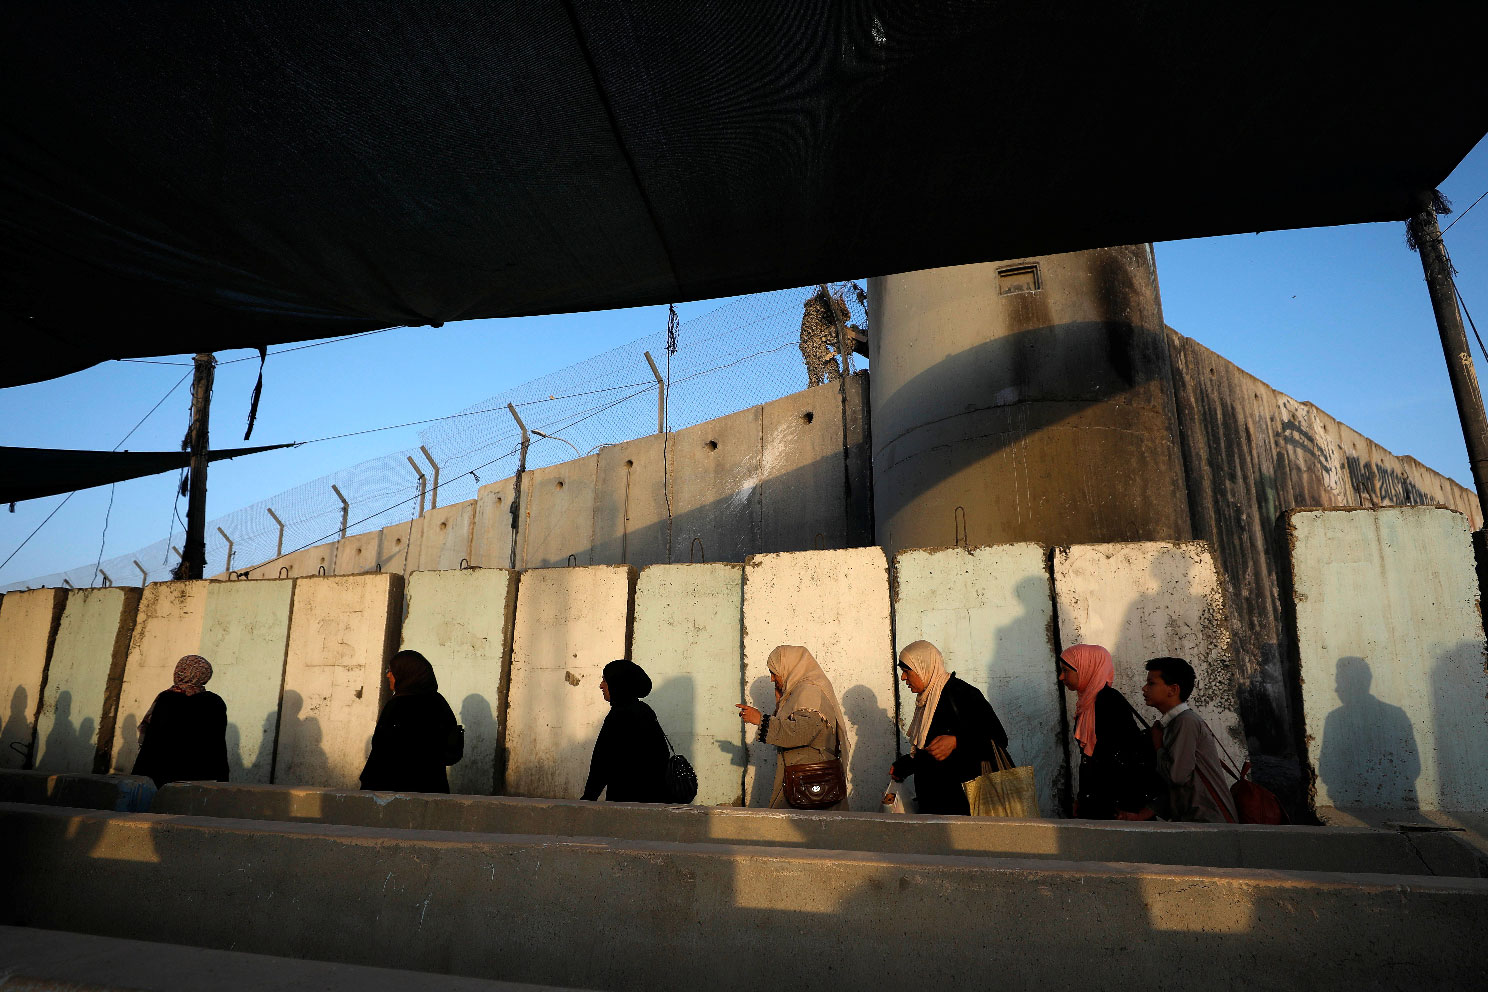 Palestinians make their way along Israel's apartheid wall to attend Friday prayer in Jerusalem's al-Aqsa mosque, at Qalandia checkpoint in the occupied West Bank